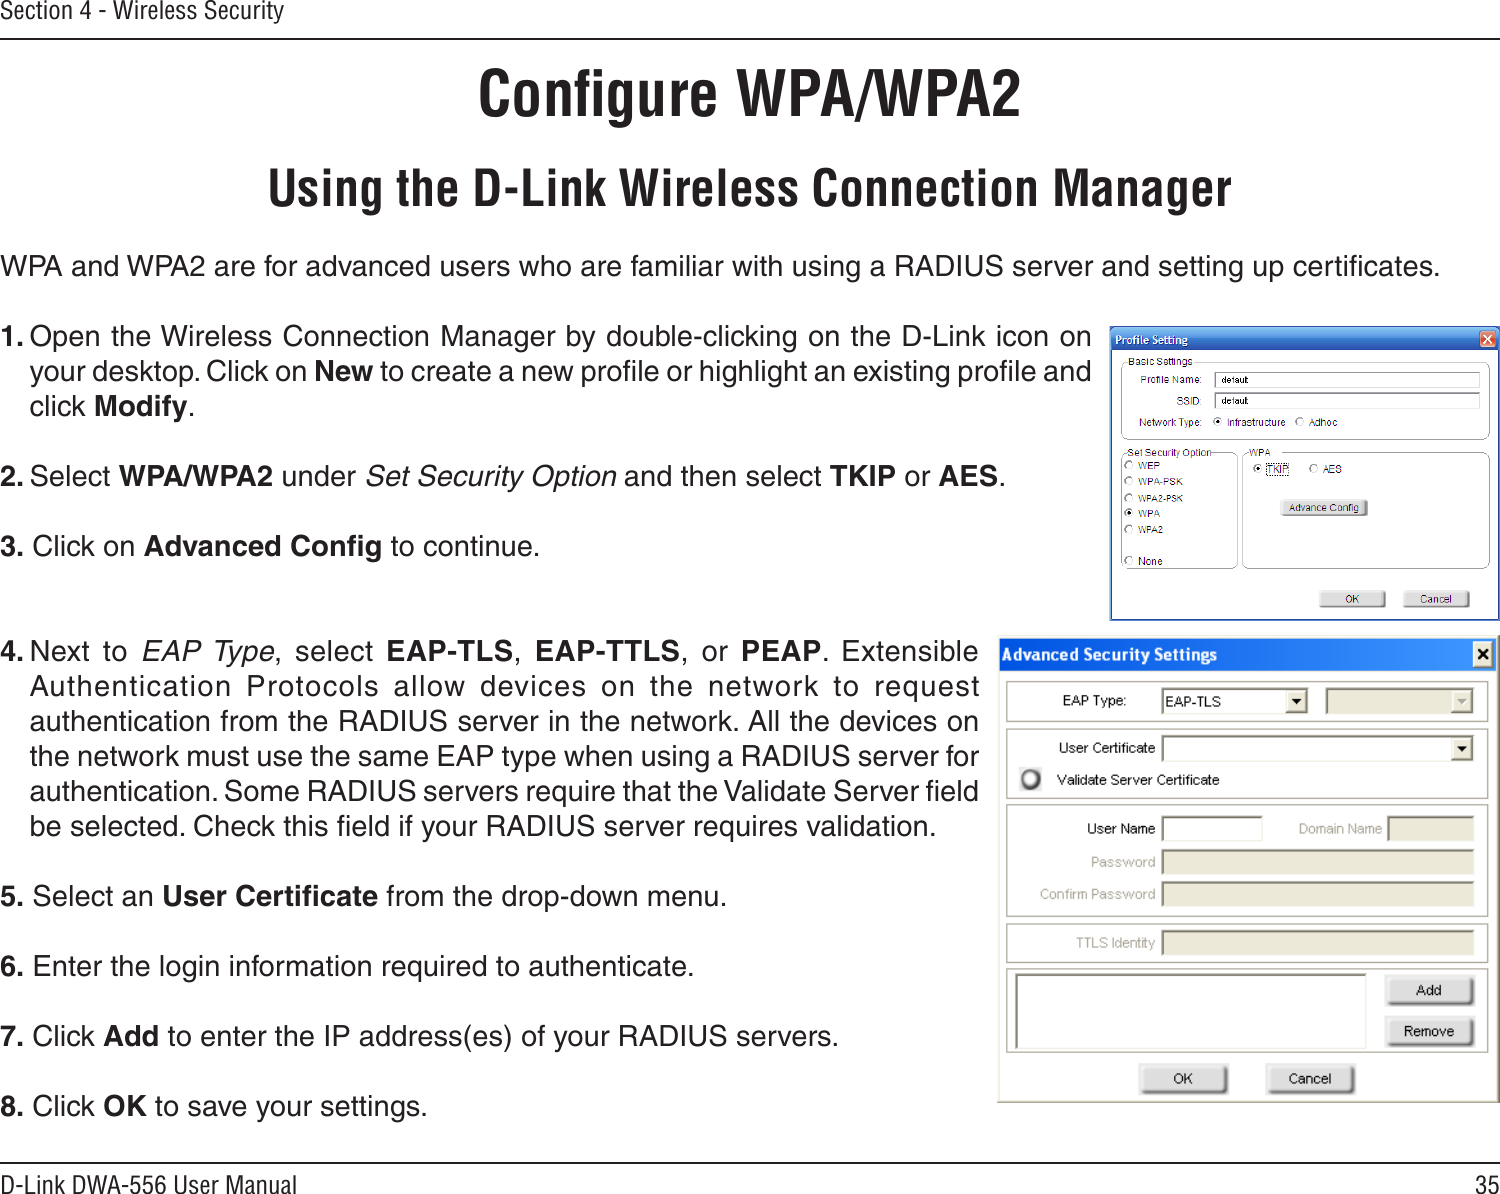 35D-Link DWA-556 User ManualSection 4 - Wireless SecurityConﬁgure WPA/WPA2Using the D-Link Wireless Connection ManagerWPA and WPA2 are for advanced users who are familiar with using a RADIUS server and setting up certiﬁcates.1. Open the Wireless Connection Manager by double-clicking on the D-Link icon on your desktop. Click on New to create a new proﬁle or highlight an existing proﬁle and click Modify. 2. Select WPA/WPA2 under Set Security Option and then select TKIP or AES.3. Click on Advanced Conﬁg to continue.4. Next  to  EAP Type,  select  EAP-TLS,  EAP-TTLS,  or  PEAP.  Extensible Authentication  Protocols  allow  devices  on  the  network  to  request authentication from the RADIUS server in the network. All the devices on the network must use the same EAP type when using a RADIUS server for authentication. Some RADIUS servers require that the Validate Server ﬁeld be selected. Check this ﬁeld if your RADIUS server requires validation.5. Select an User Certiﬁcate from the drop-down menu.6. Enter the login information required to authenticate.7. Click Add to enter the IP address(es) of your RADIUS servers.8. Click OK to save your settings.